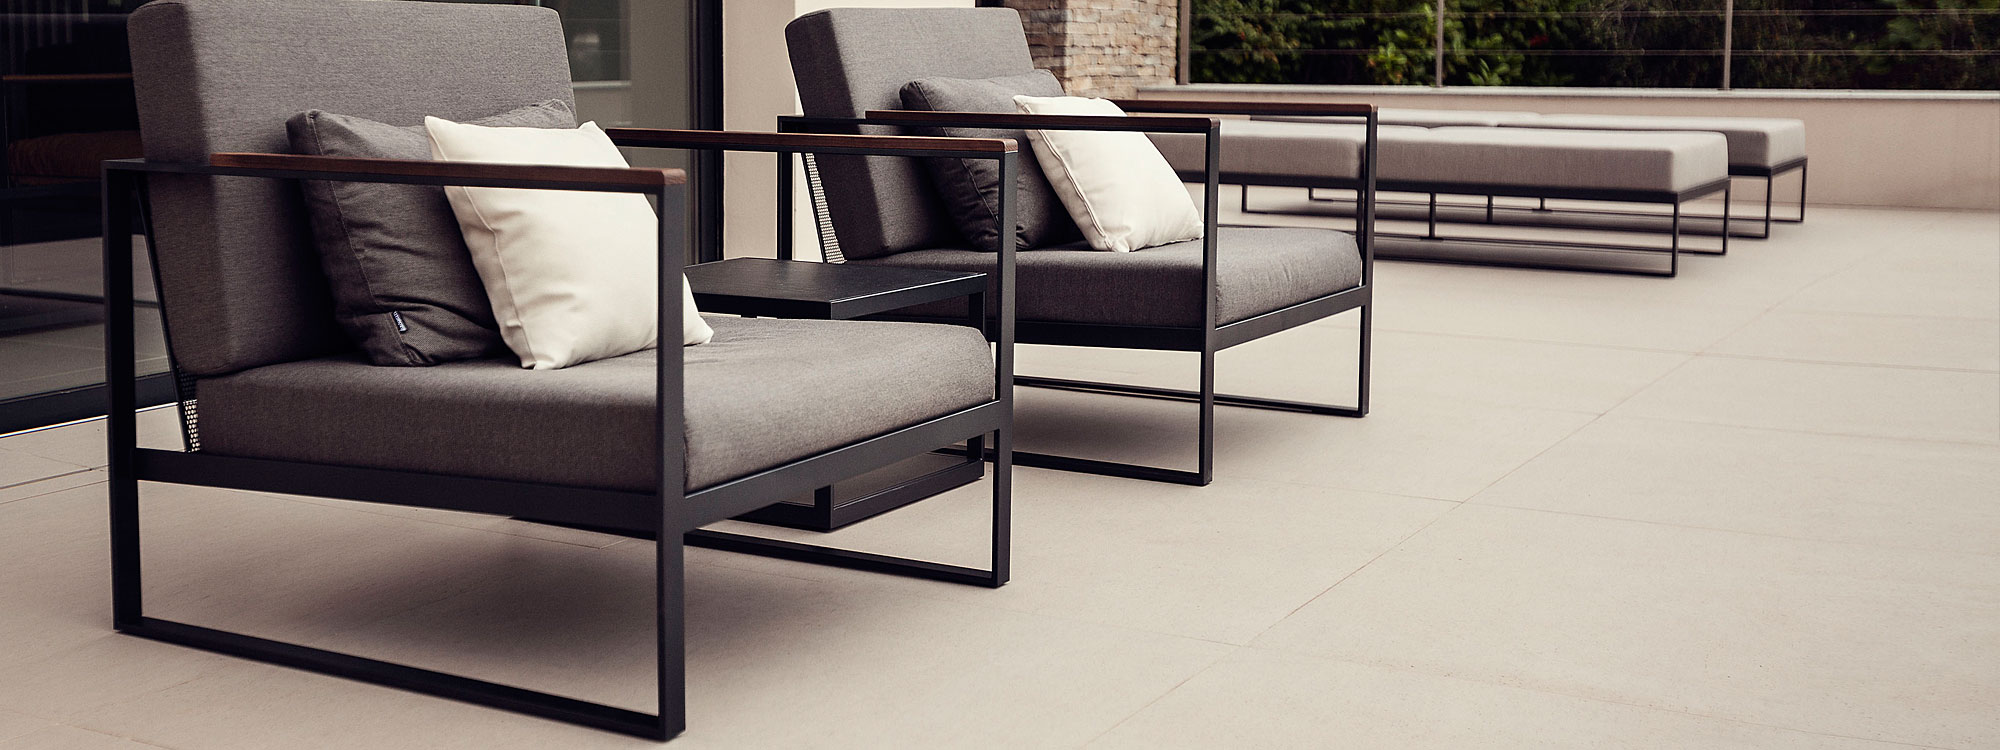 Roshults-garden-easy-chairs-anthracite-grey-cushions-outside-terrace.jpg